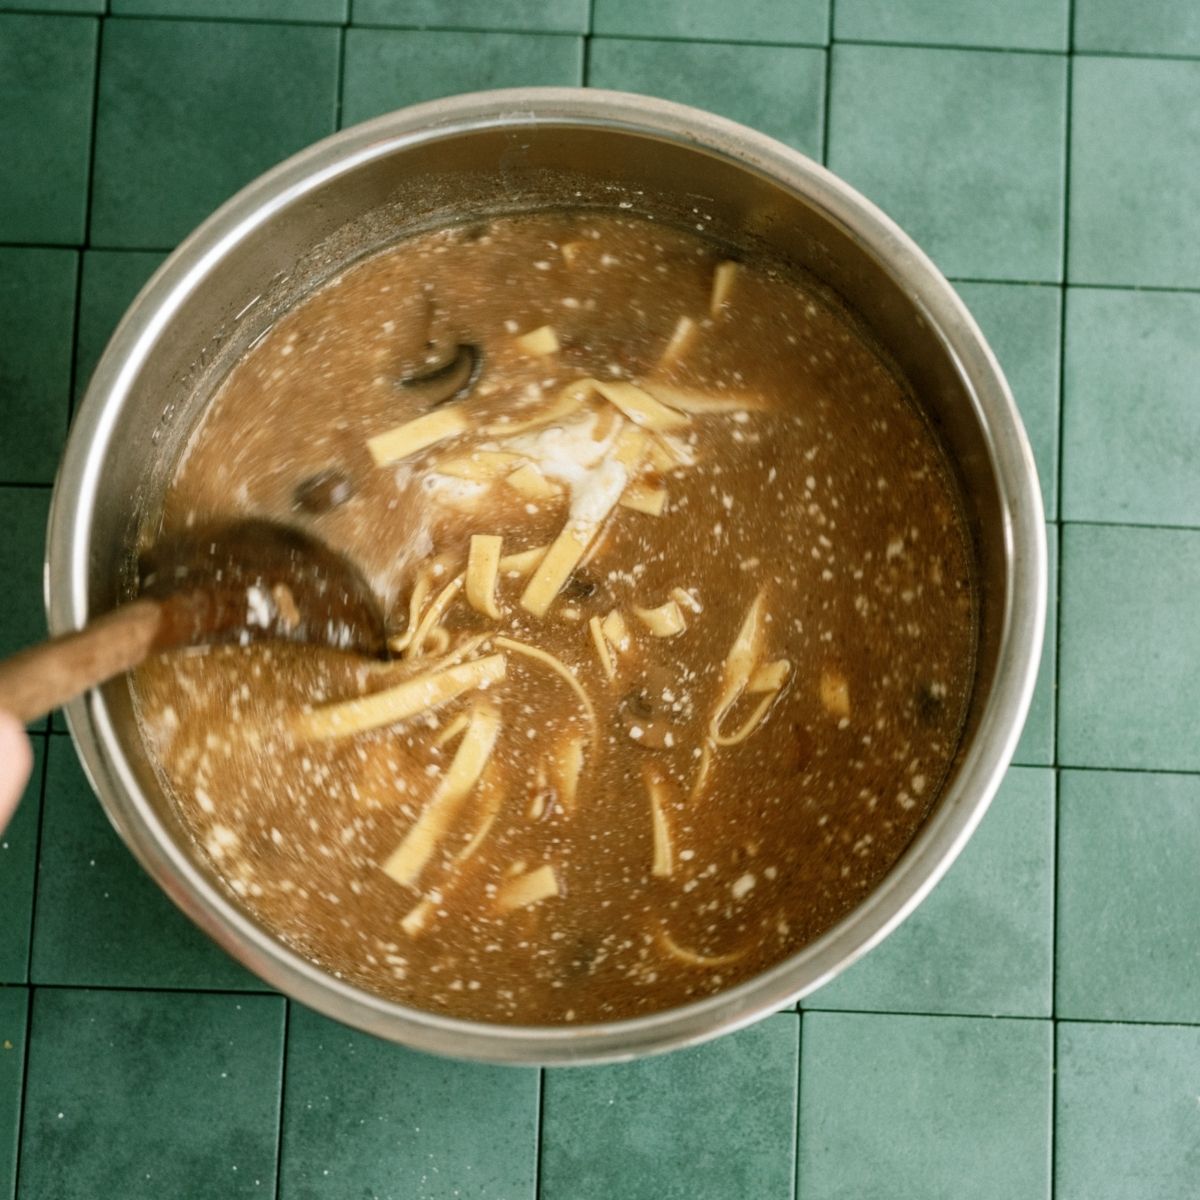 All ingredients for Instant Pot Beef Stroganoff Soup mixed together in the Instant Pot